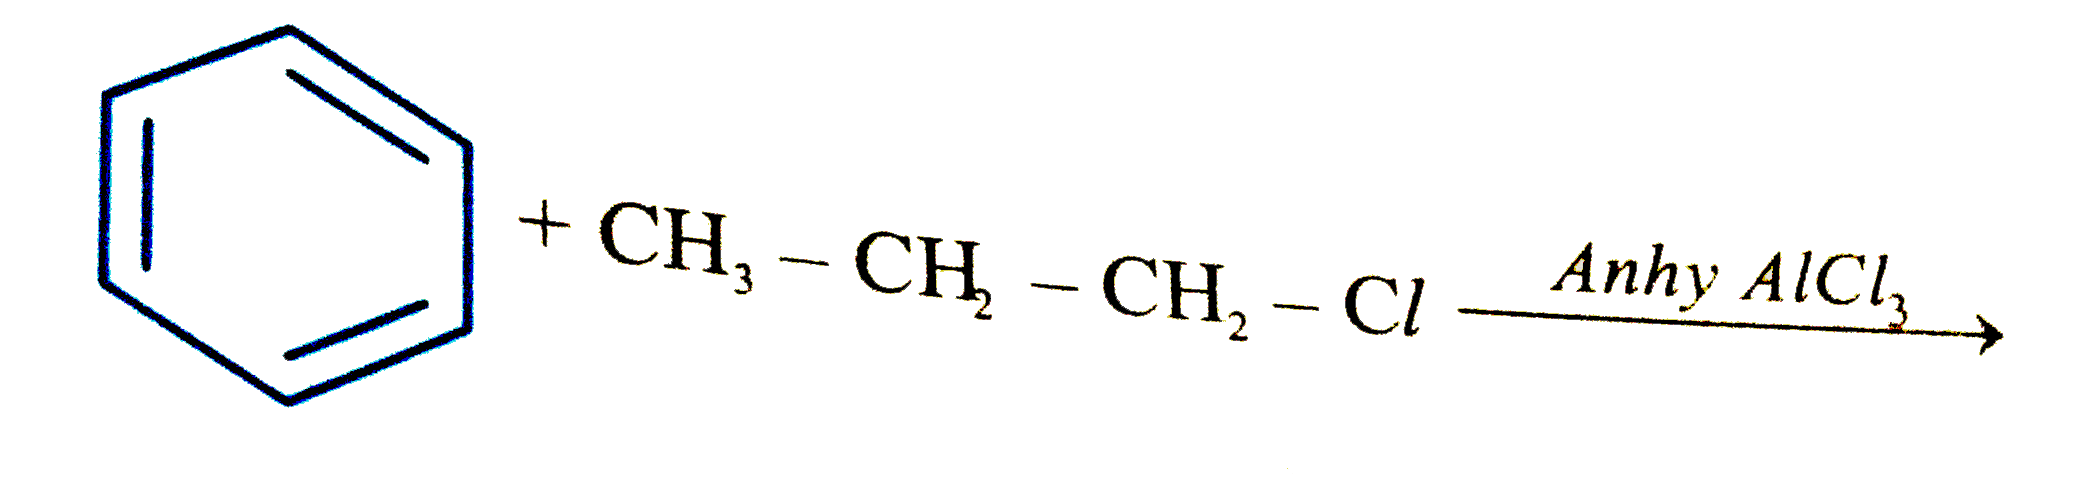 What will be the product obtain as a result of the following reaction?